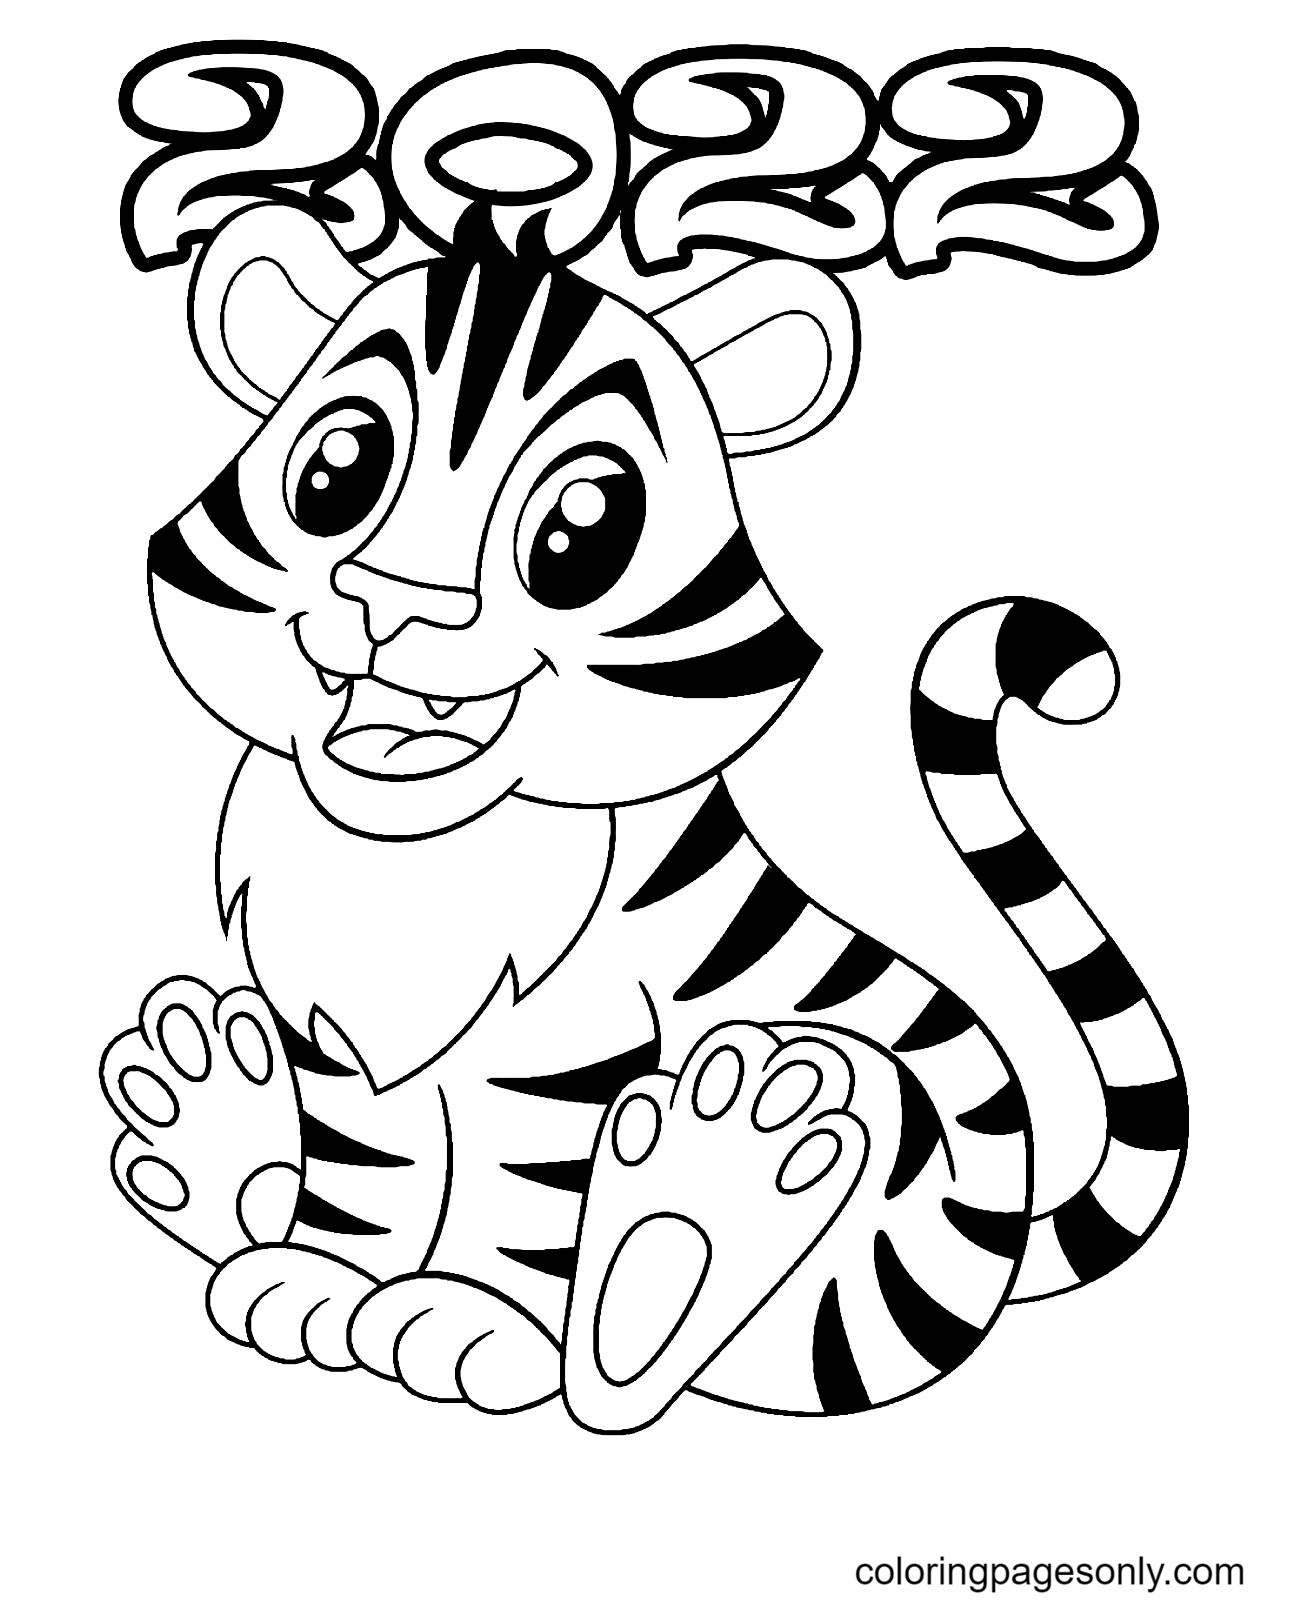 Year 2022 Tiger Coloring Pages